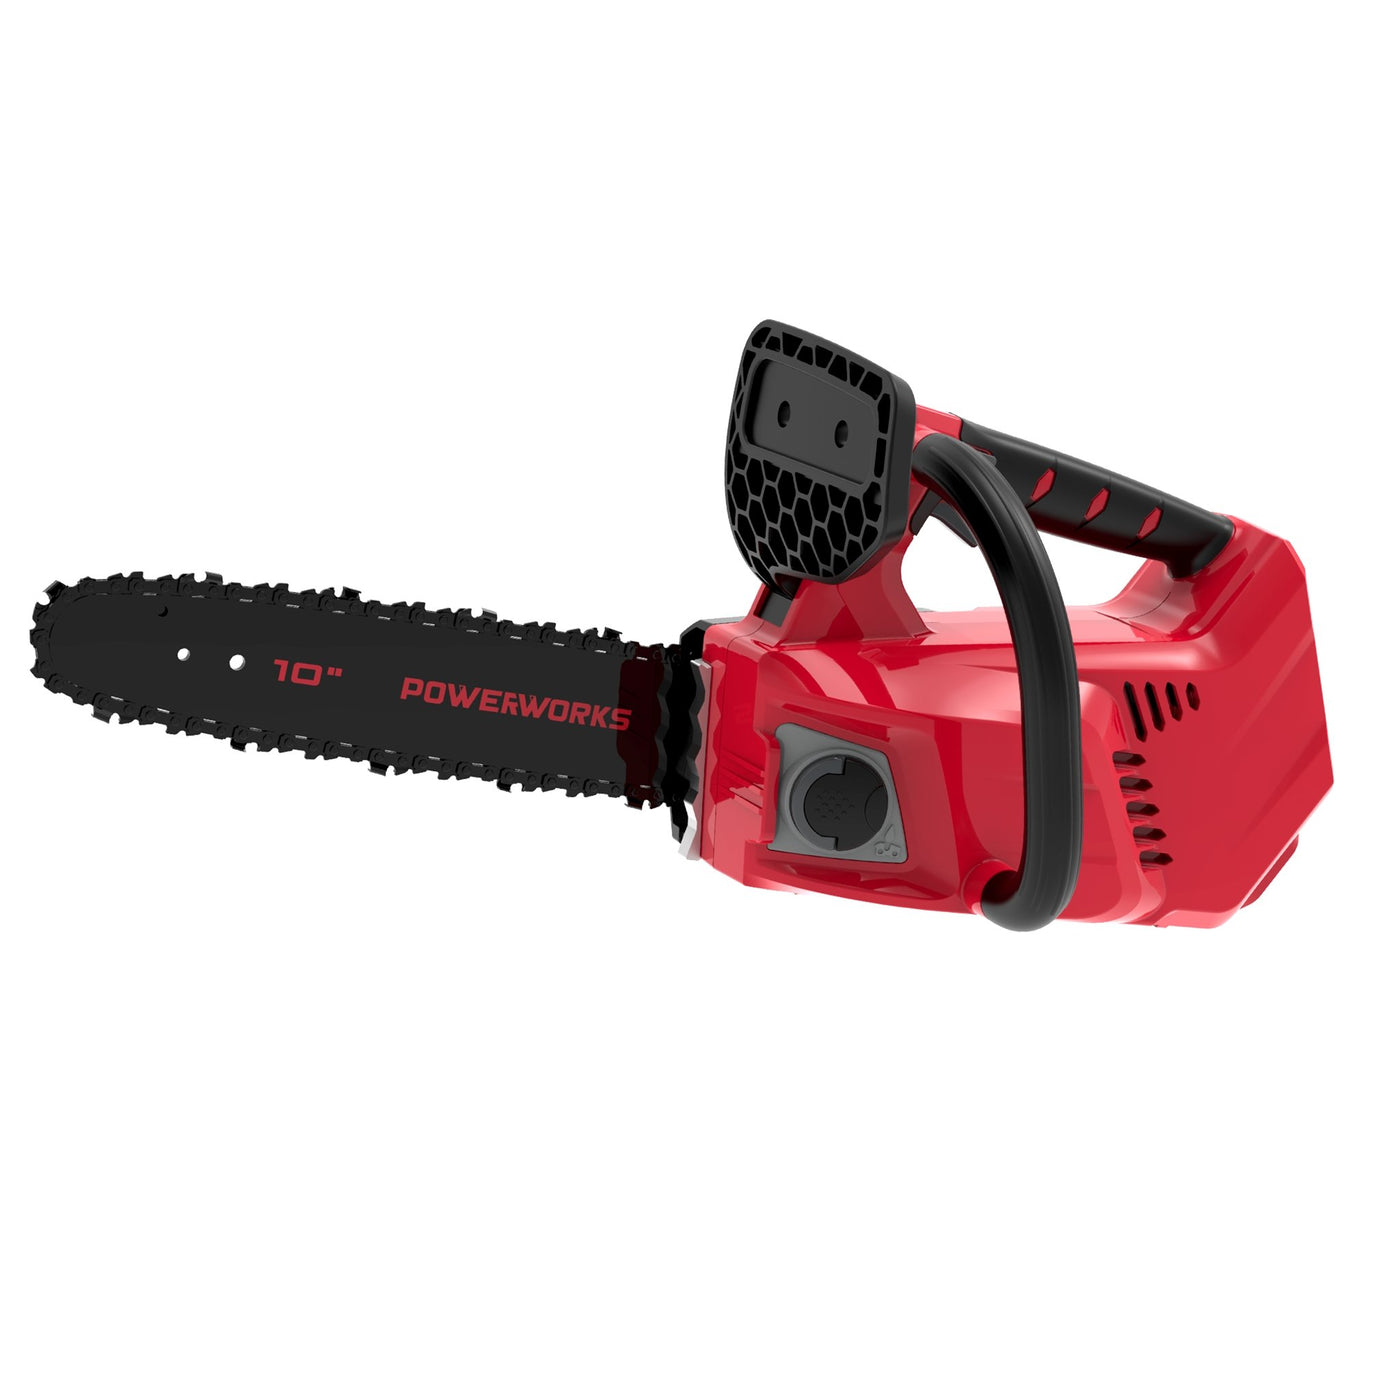 Powerworks 40V top handle chainsaw 5ah kit - Solo New Zealand